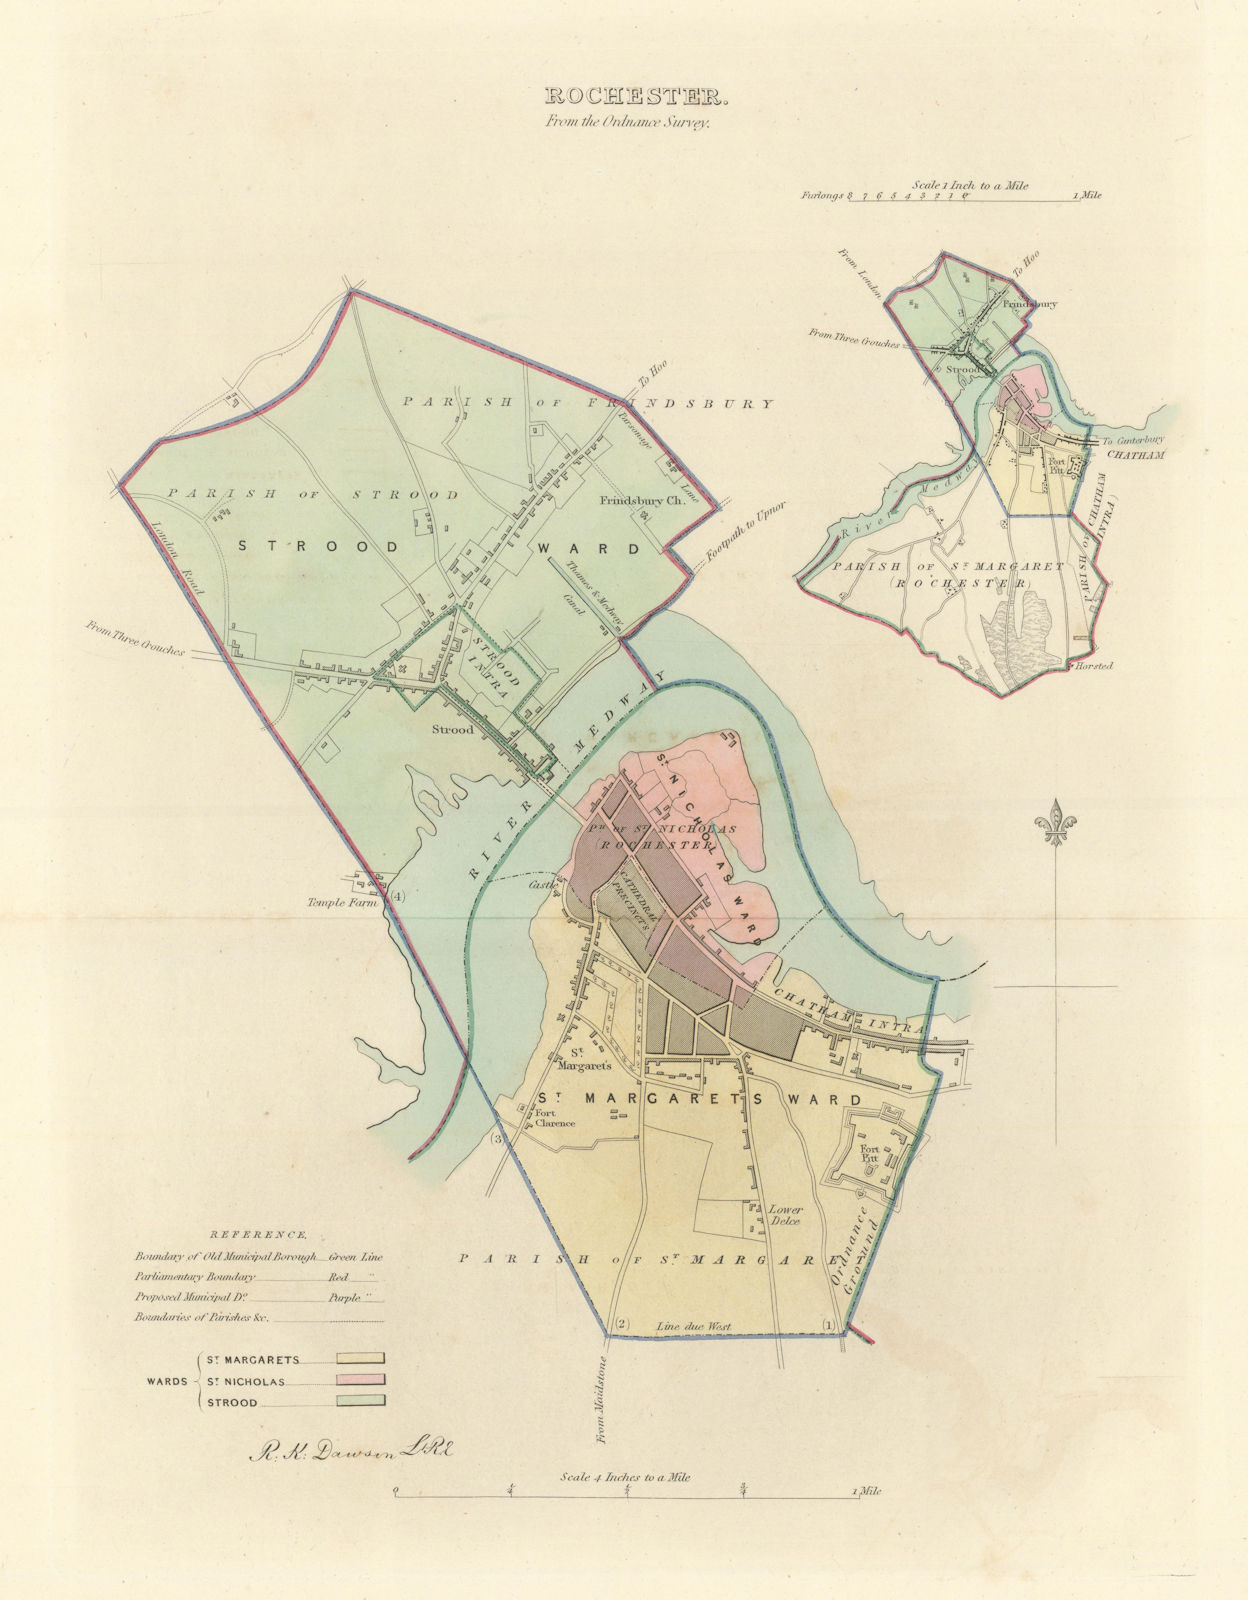 ROCHESTER borough/town plan. BOUNDARY COMMISSION. Strood Kent. DAWSON 1837 map